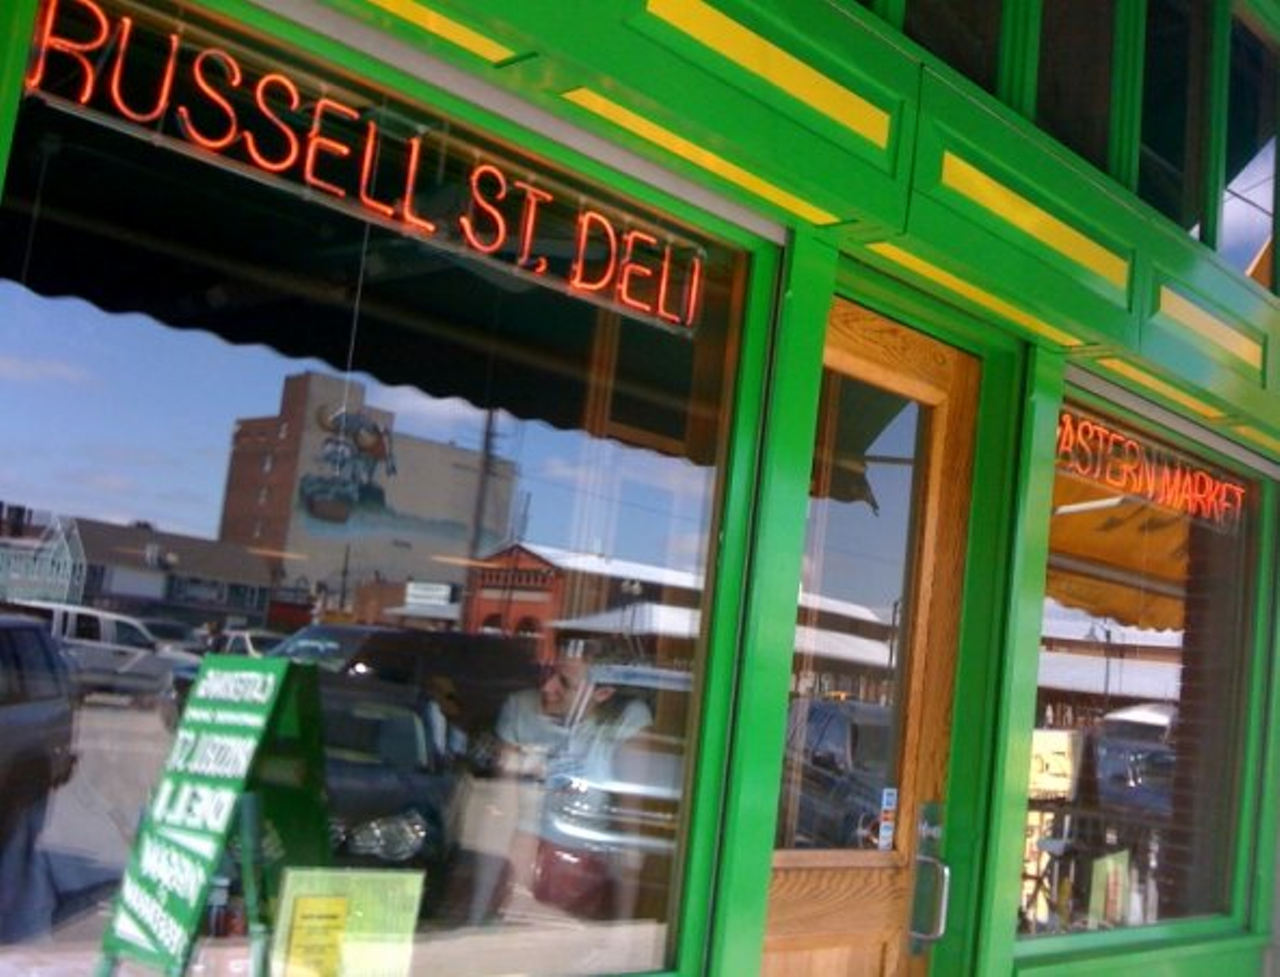 Russell Street Deli 
Courtesy photo
A great place to take a break from shopping at Eastern Market. Seating is communal, so if you don't mind sitting close with strangers stop in for great scrambles and sandwiches.